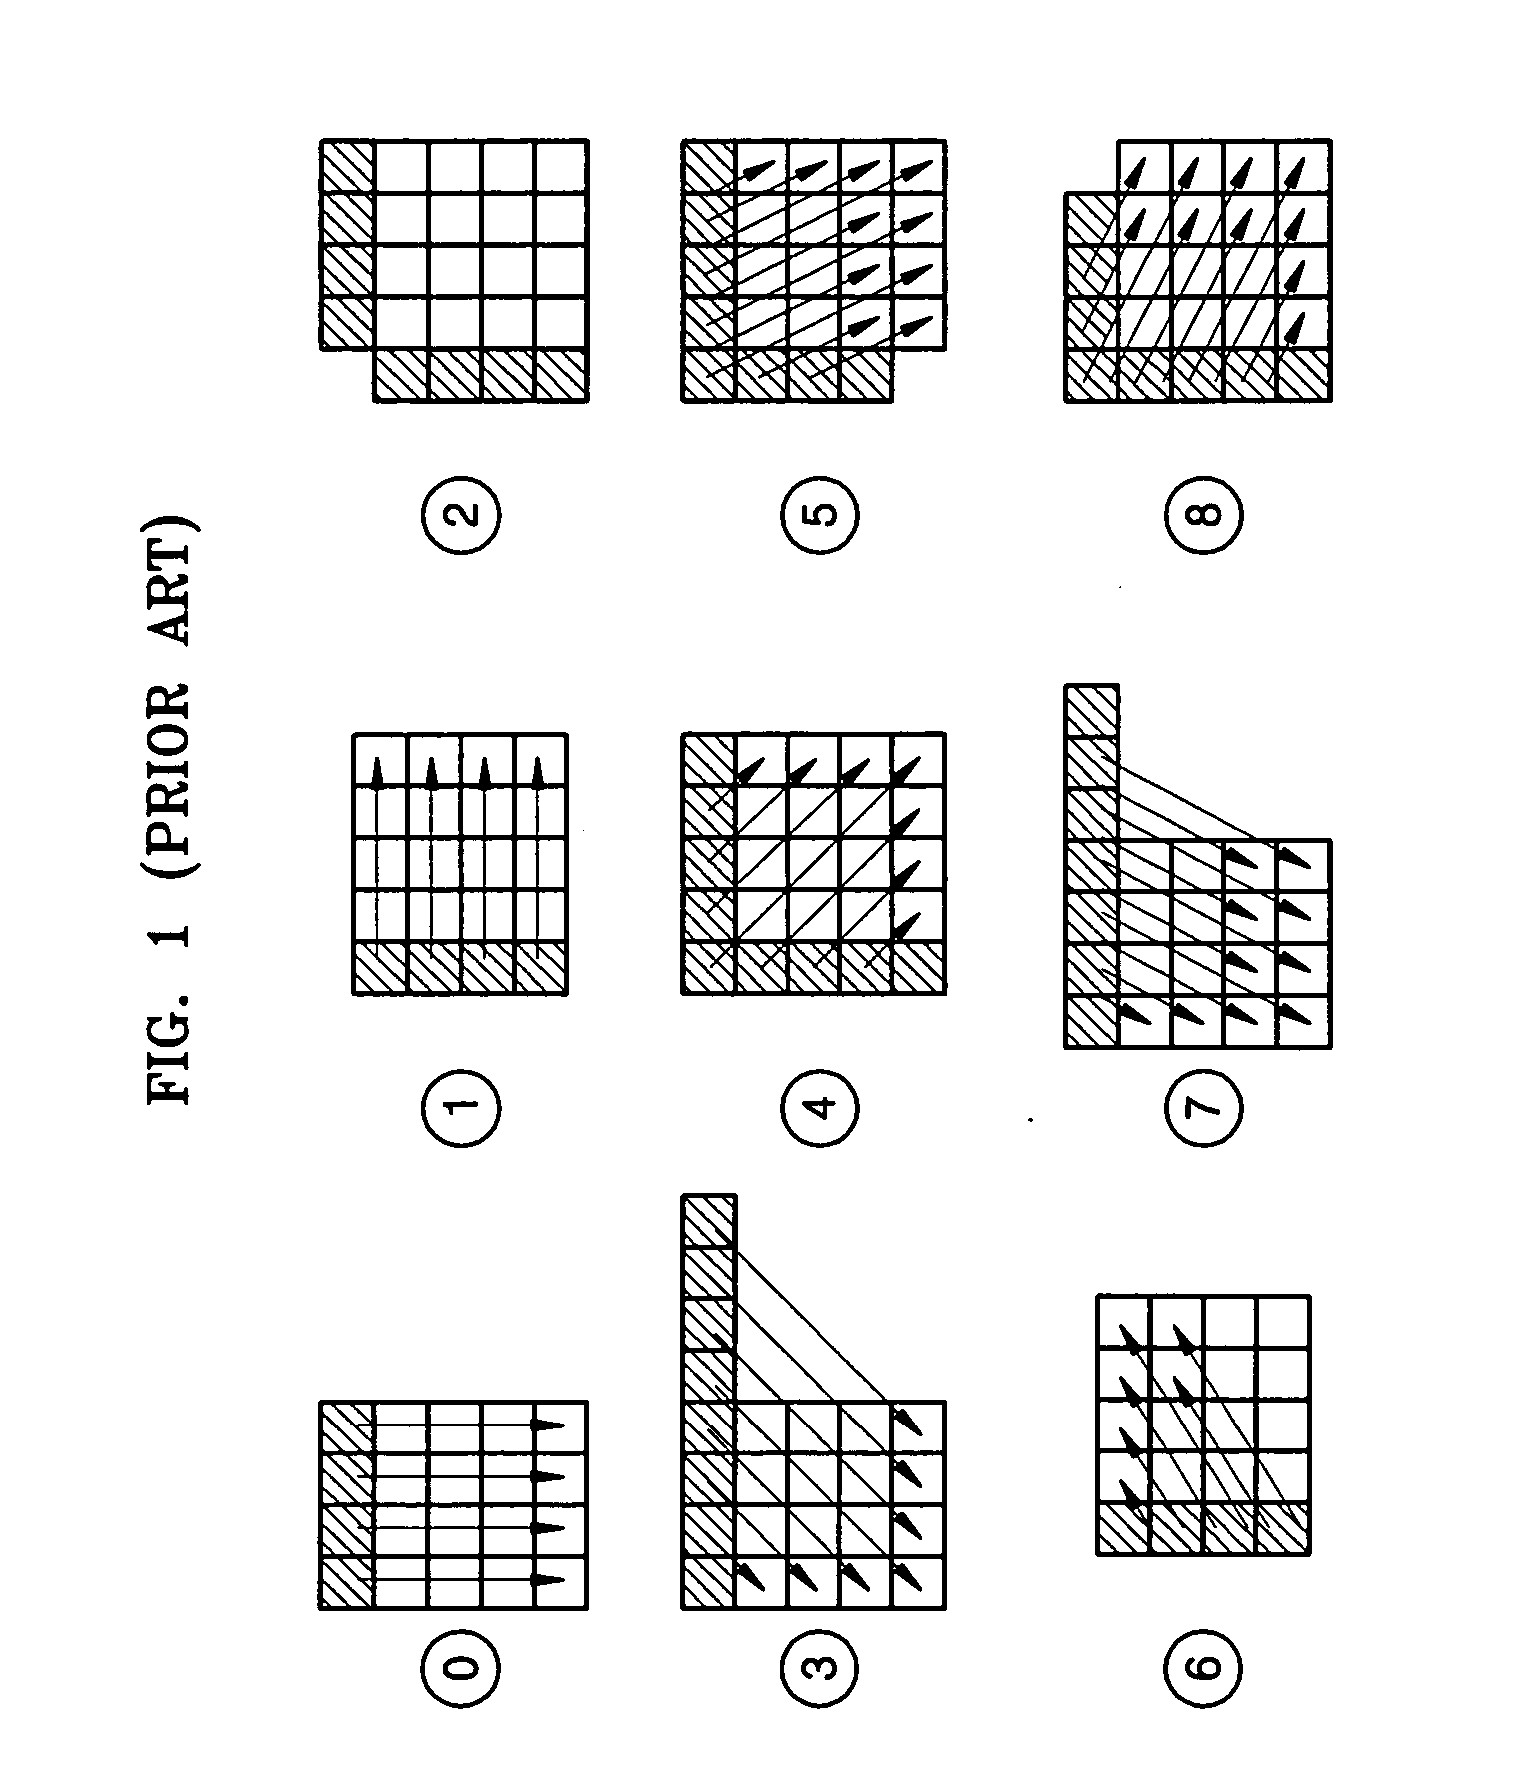 Apparatus and method for spatially predicting image data, apparatus and method for encoding image data, apparatus and method for compensating for spatial prediction of image data, and apparatus and method for decoding image data